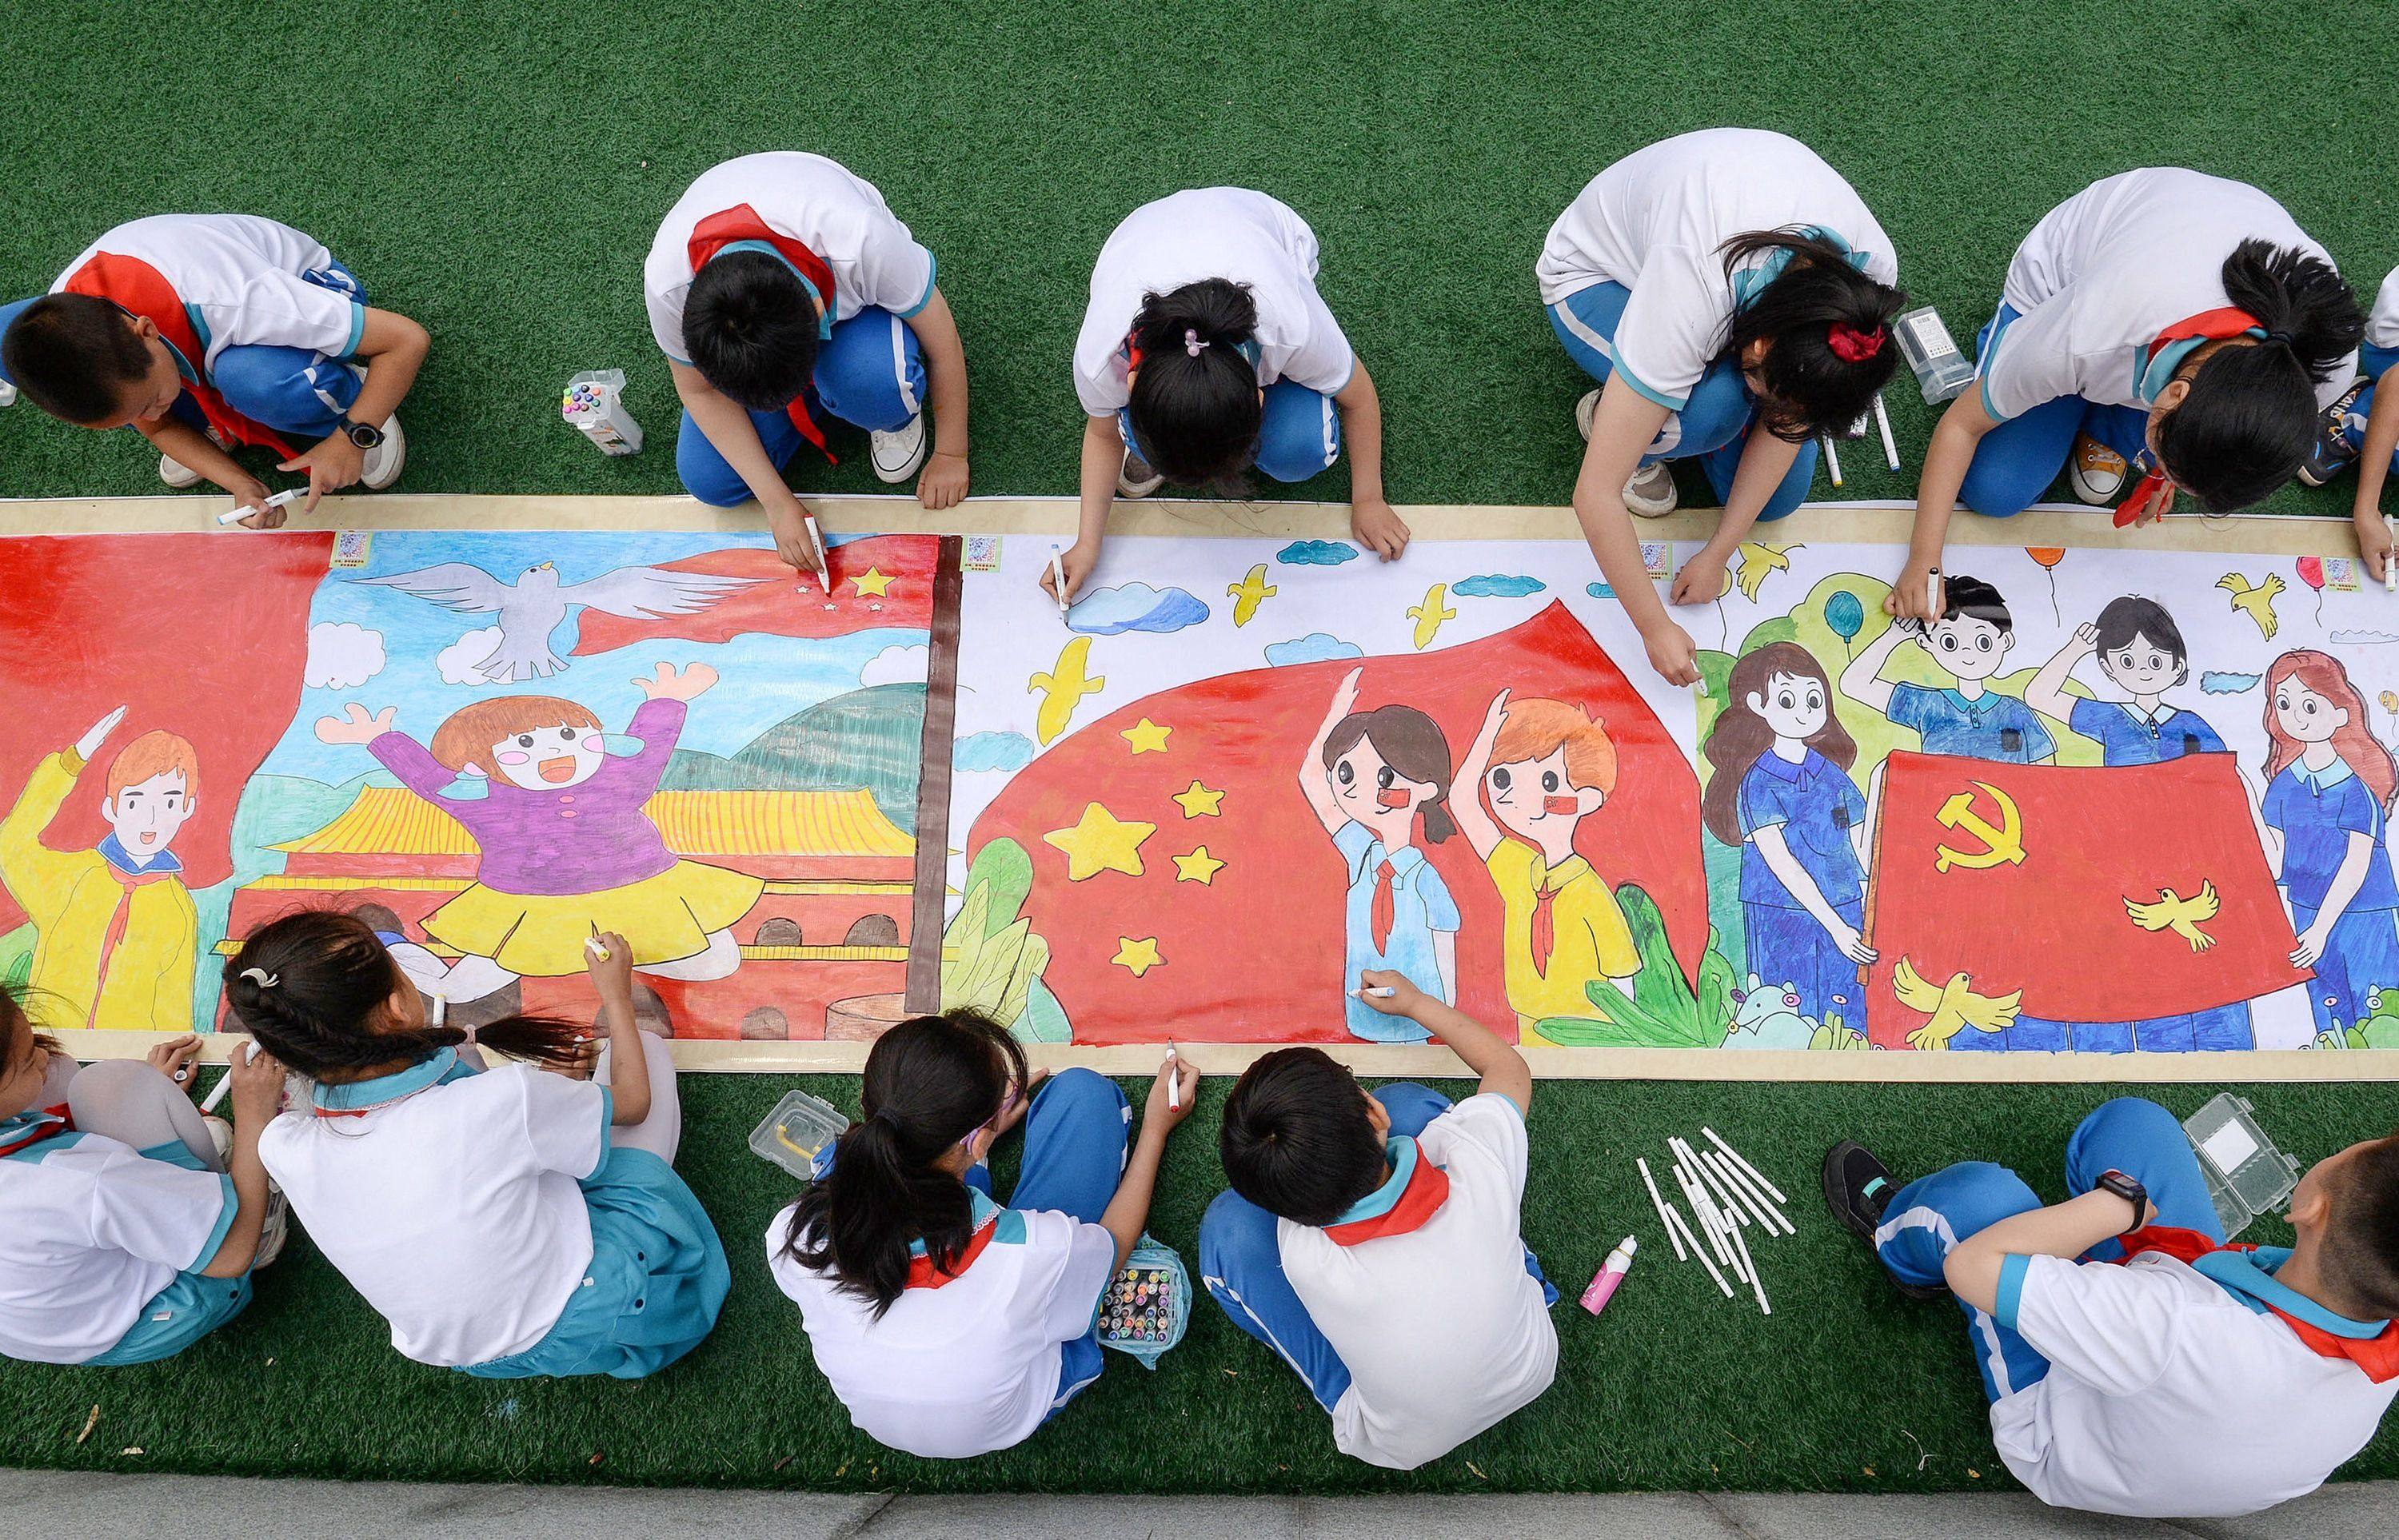 The education ministry says it will do more to promote Chinese culture in the classroom. Photo: AFP